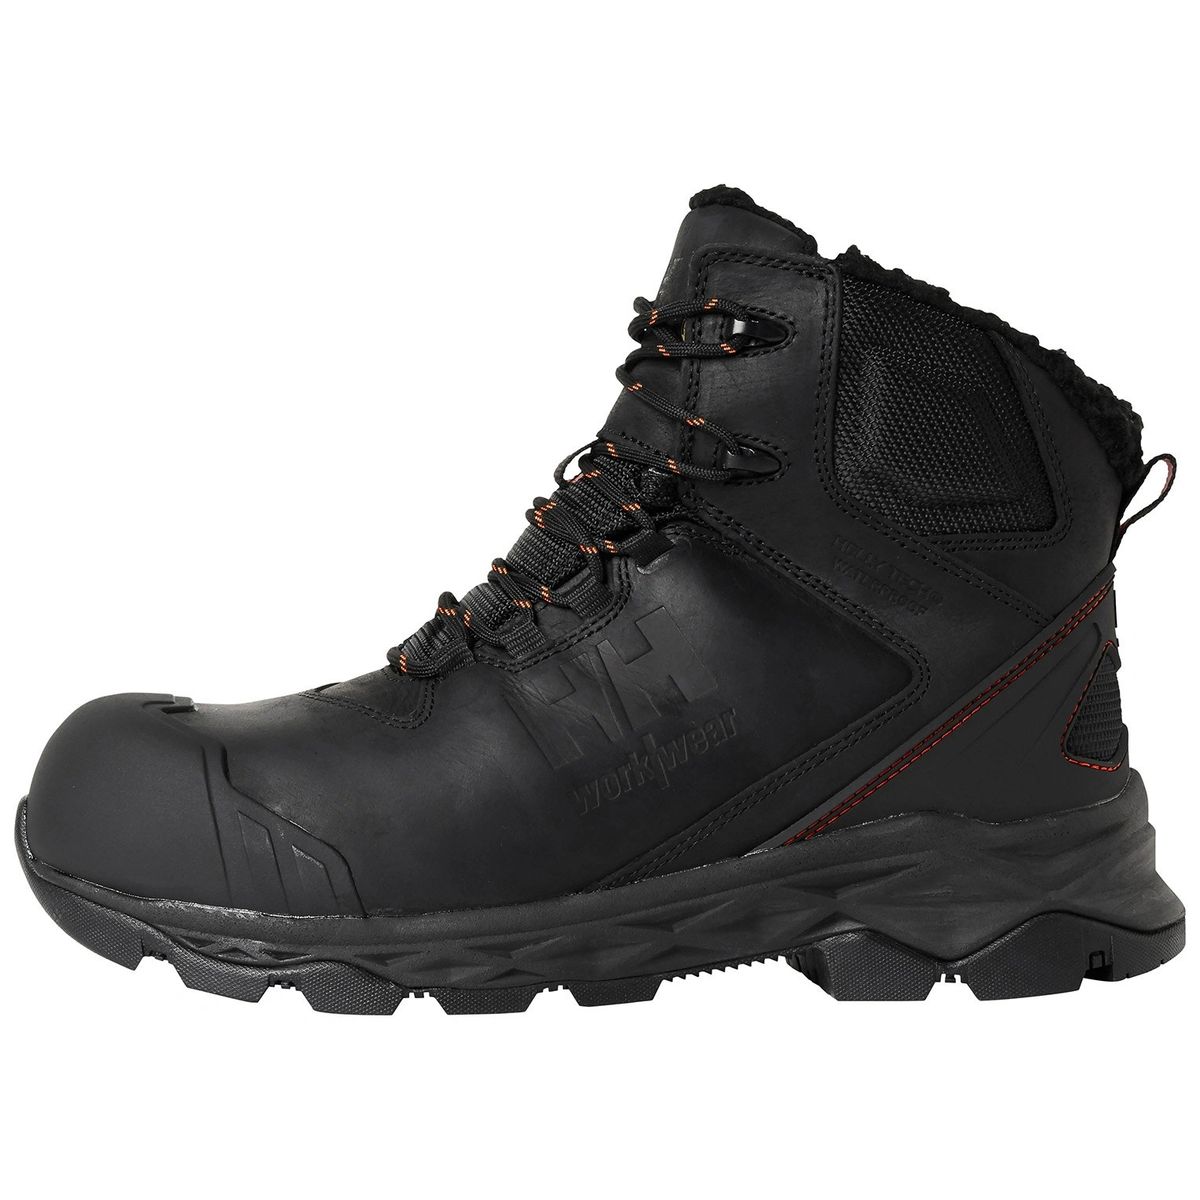 HELLY HANSEN OXFORD INSULATED WINTER COMPOSITE-TOE SAFETY BOOTS 78404